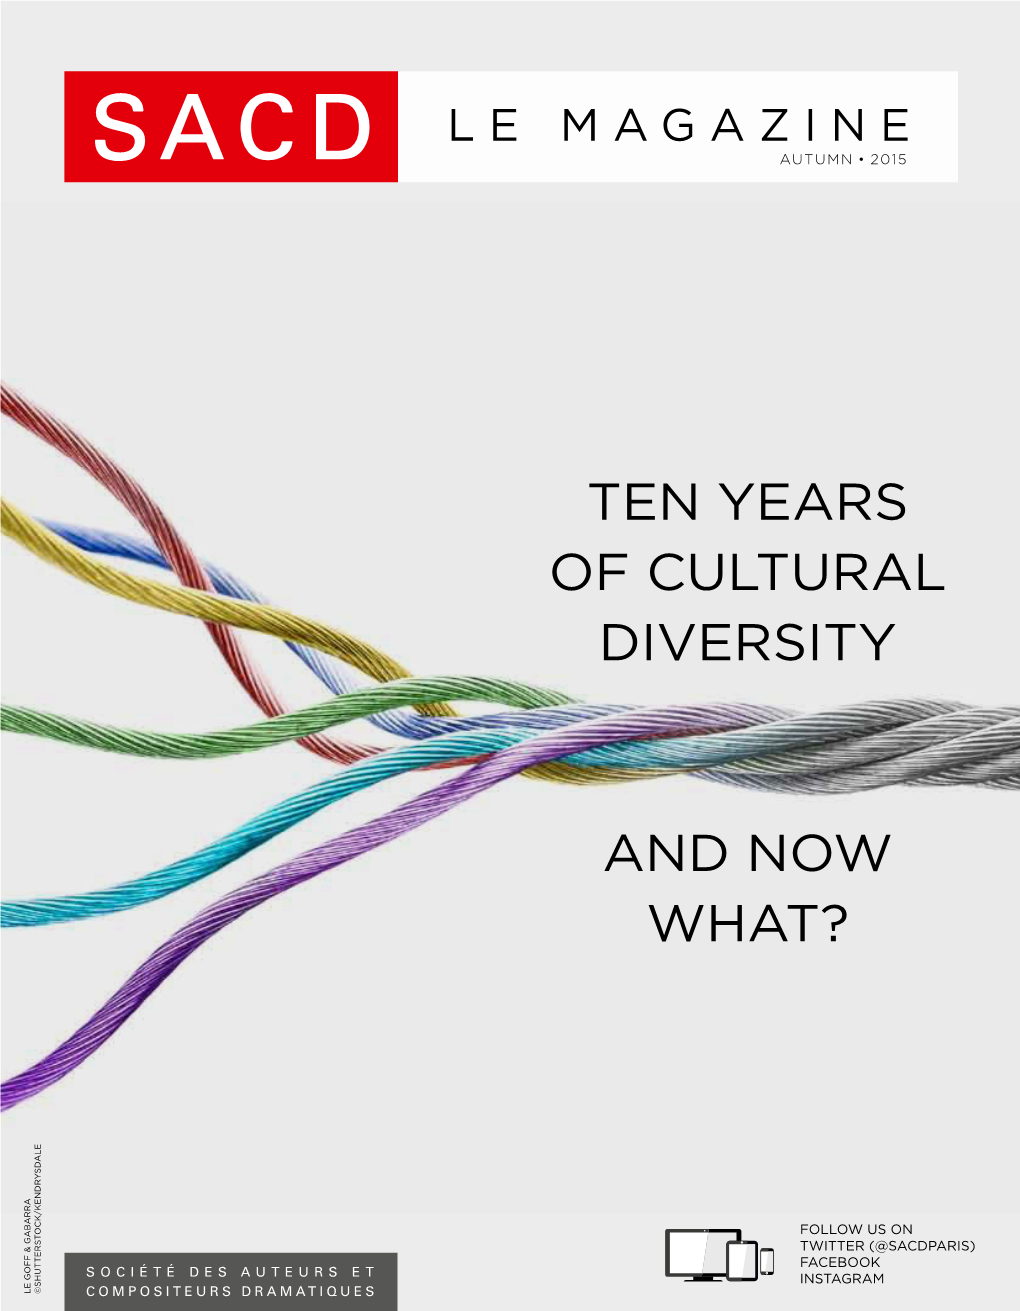 Ten Years of Cultural Diversity and Now What?